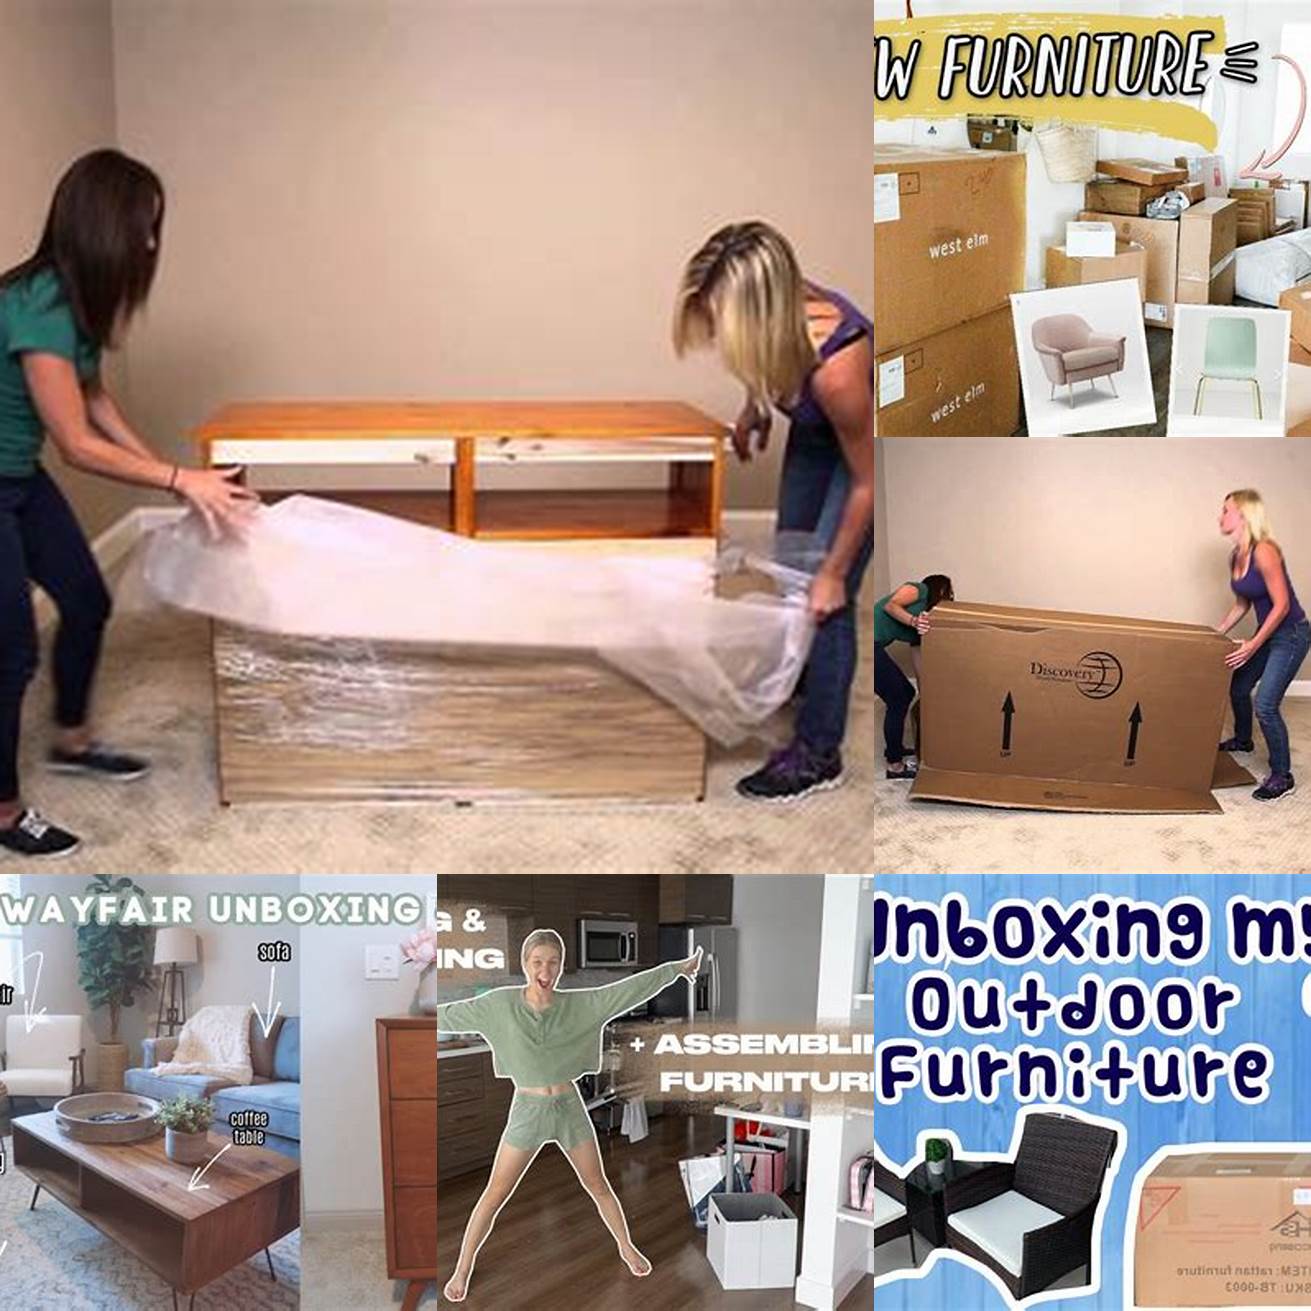 Unboxing the Furniture